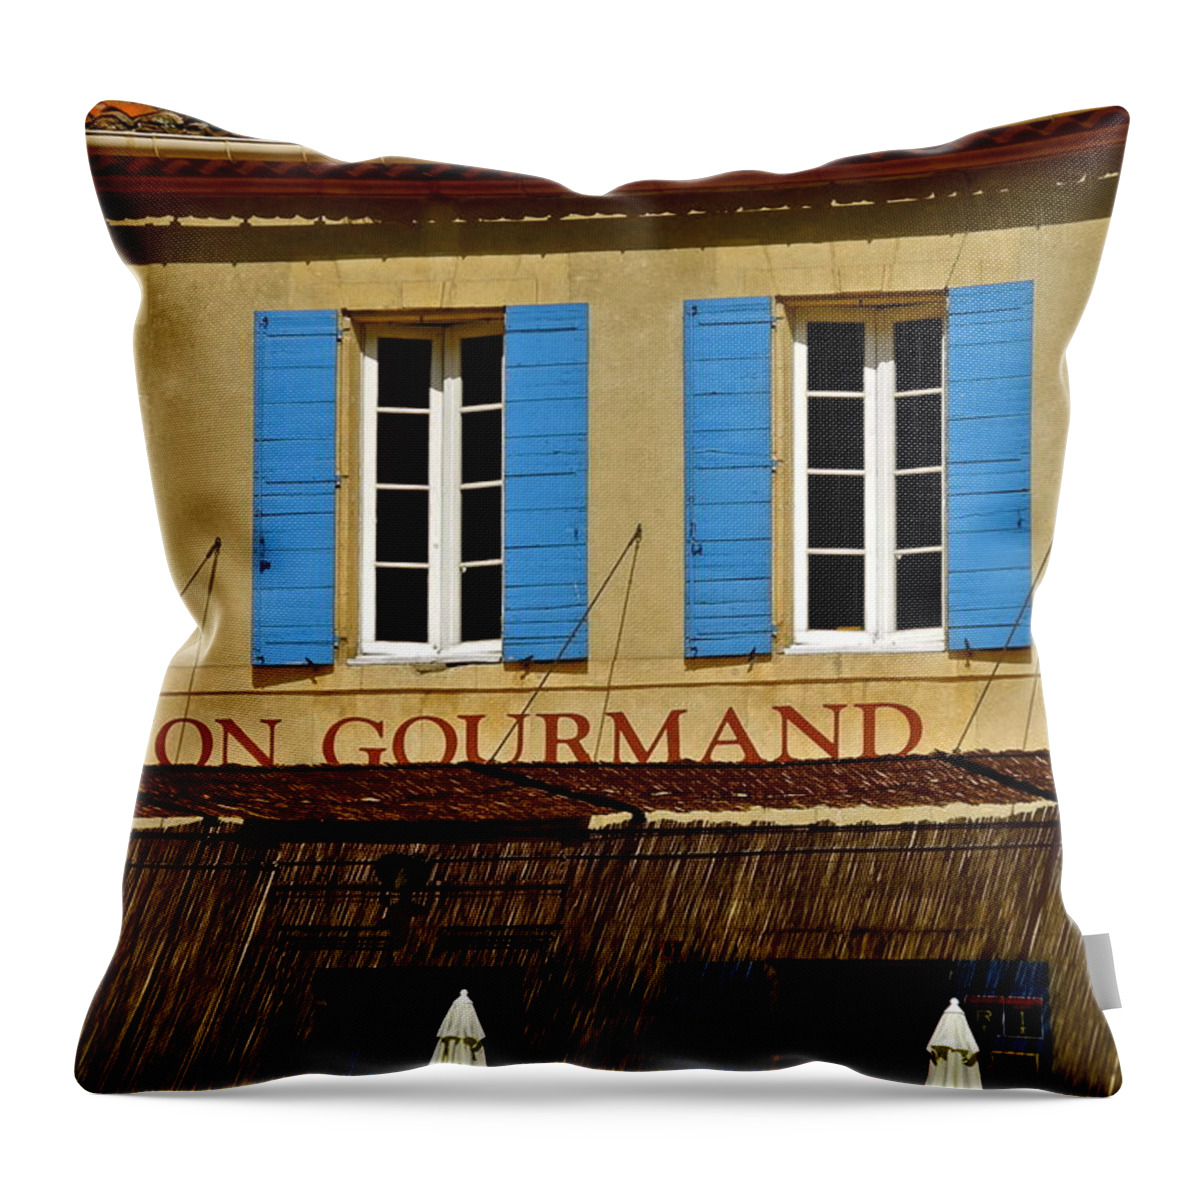 Le Lion Gourmand Throw Pillow featuring the photograph Le Lion Gourmand in Arles by Kirsten Giving